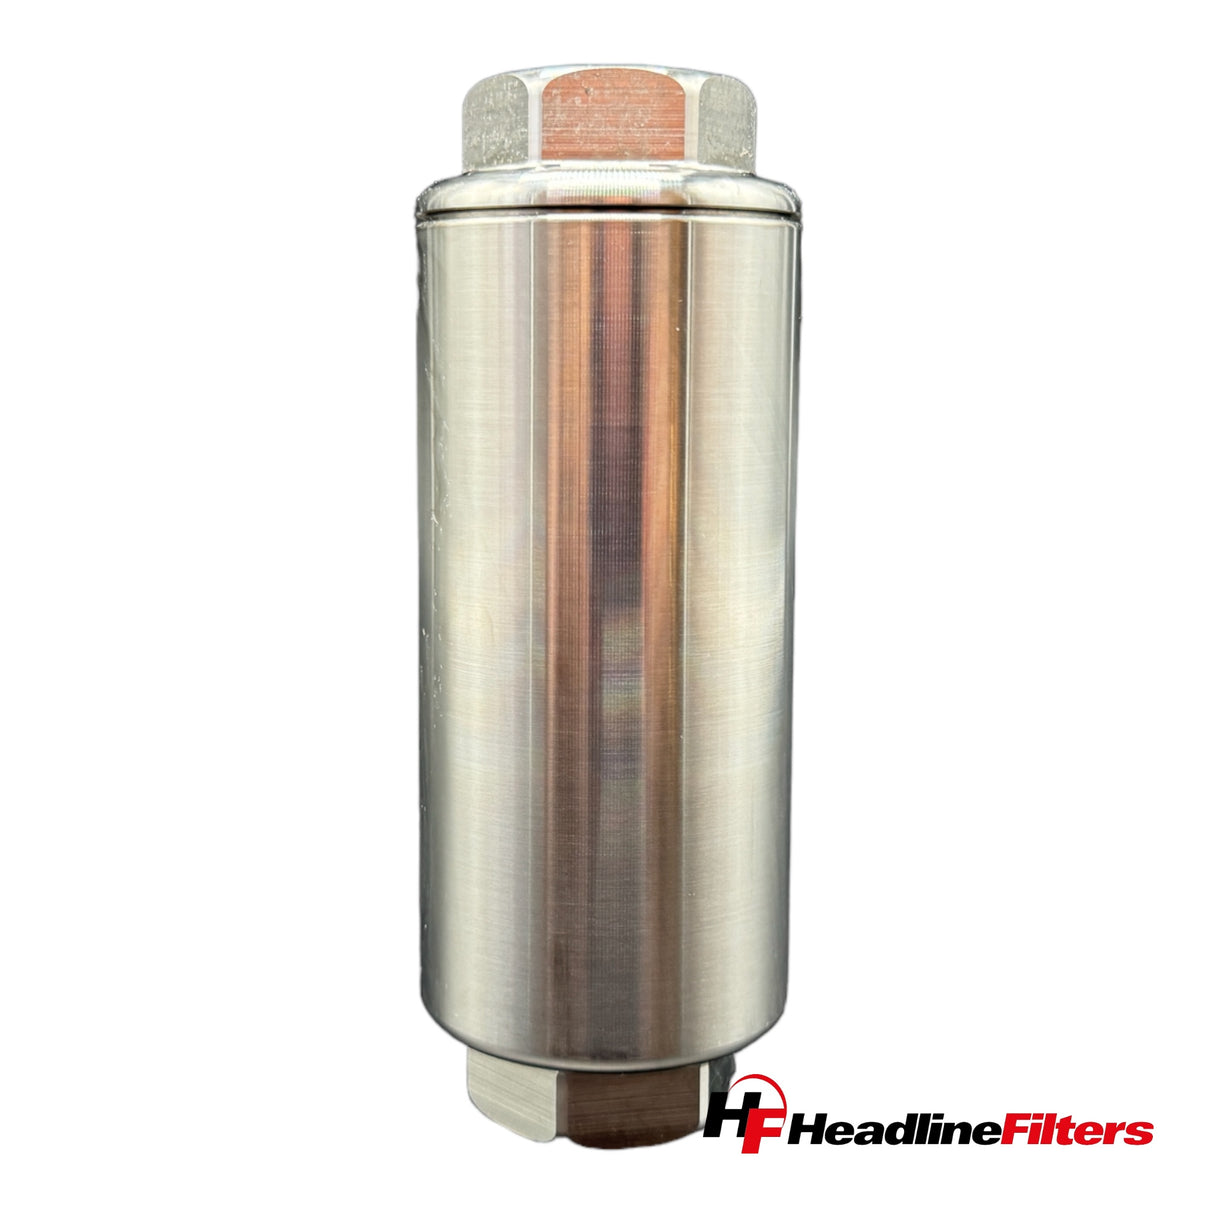 Stainless Steel Filter Housing - Model 136IL